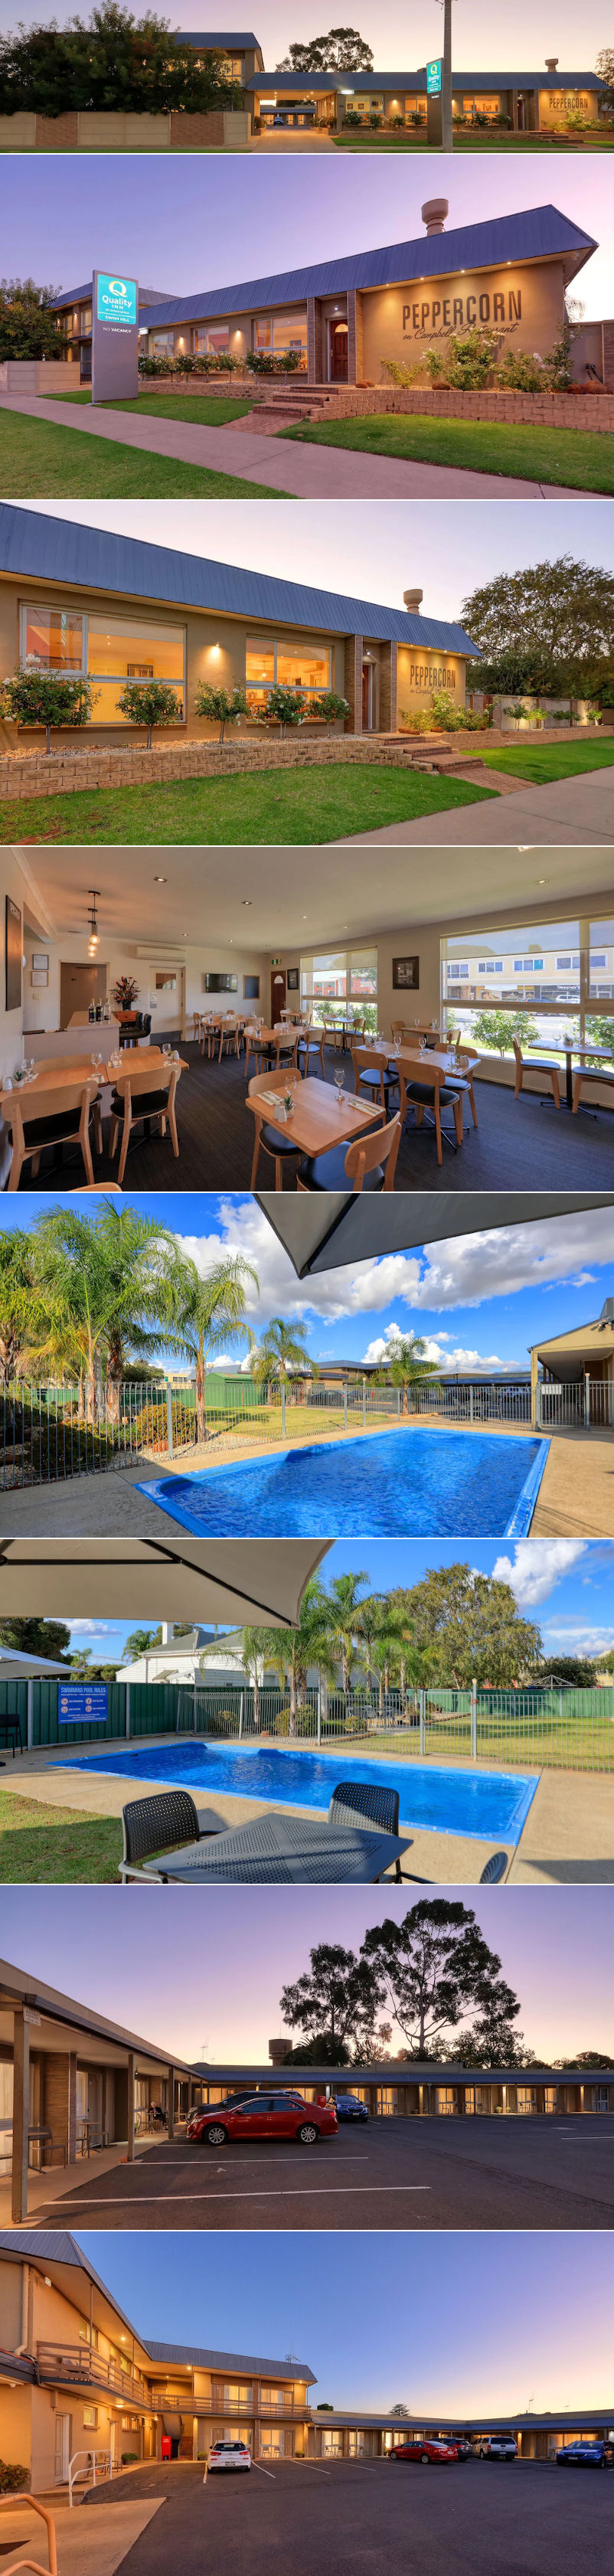 Quality Inn Swan Hill - Grounds and facilities